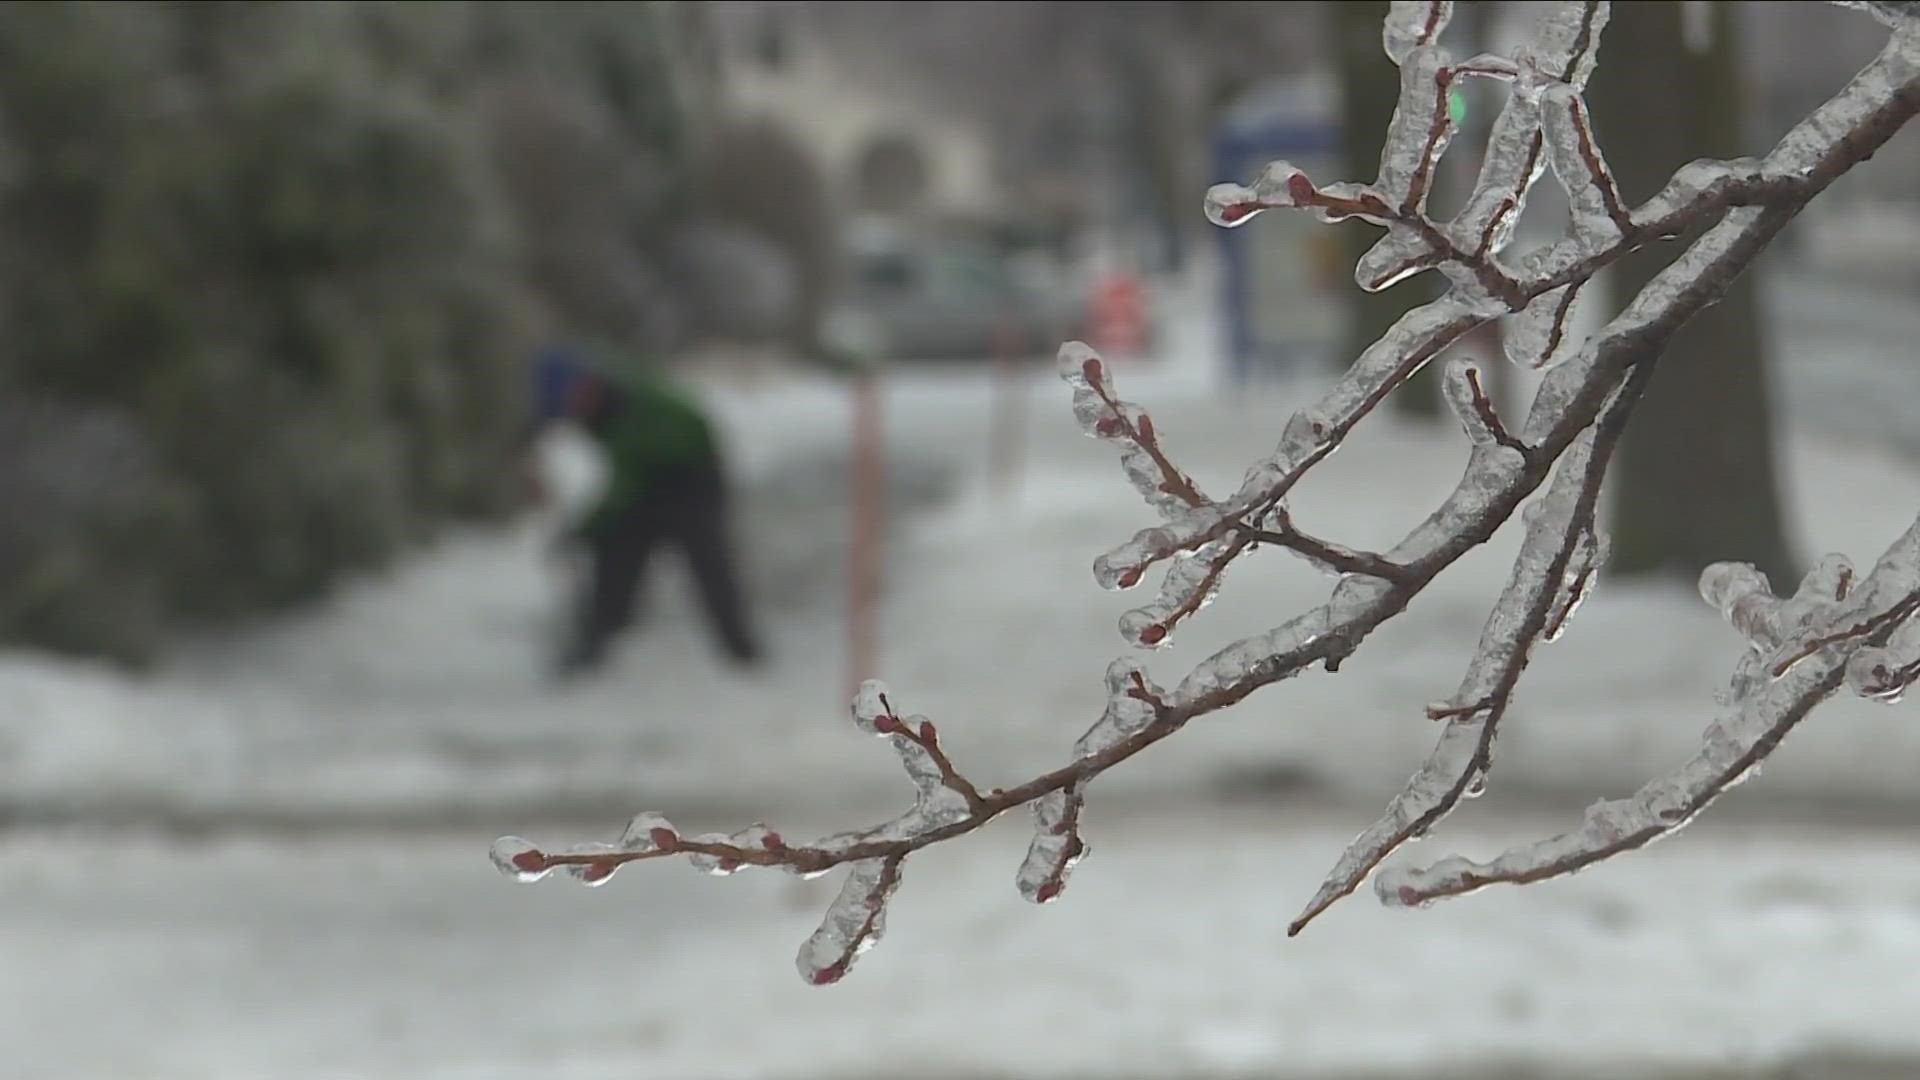 Channel 2 took to the streets to see how Buffalo is handling the aftermath of Wednesday's winter weather.